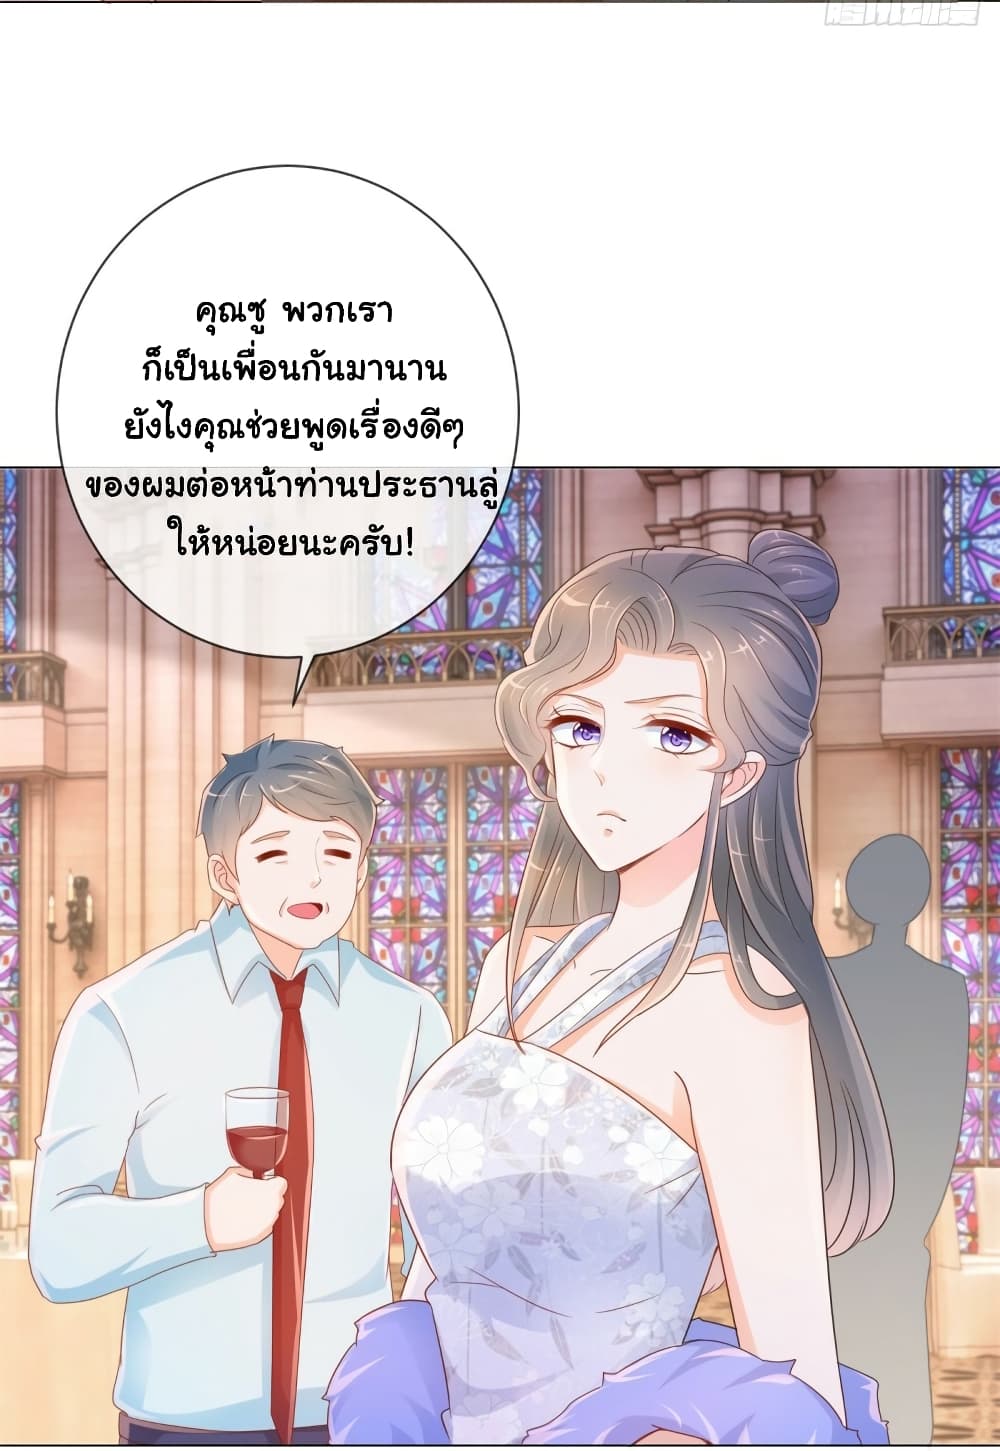 The Lovely Wife And Strange Marriage à¹à¸œà¸™à¸£à¸±à¸à¸¥à¸§à¸‡à¹ƒà¸ˆ 322 (28)